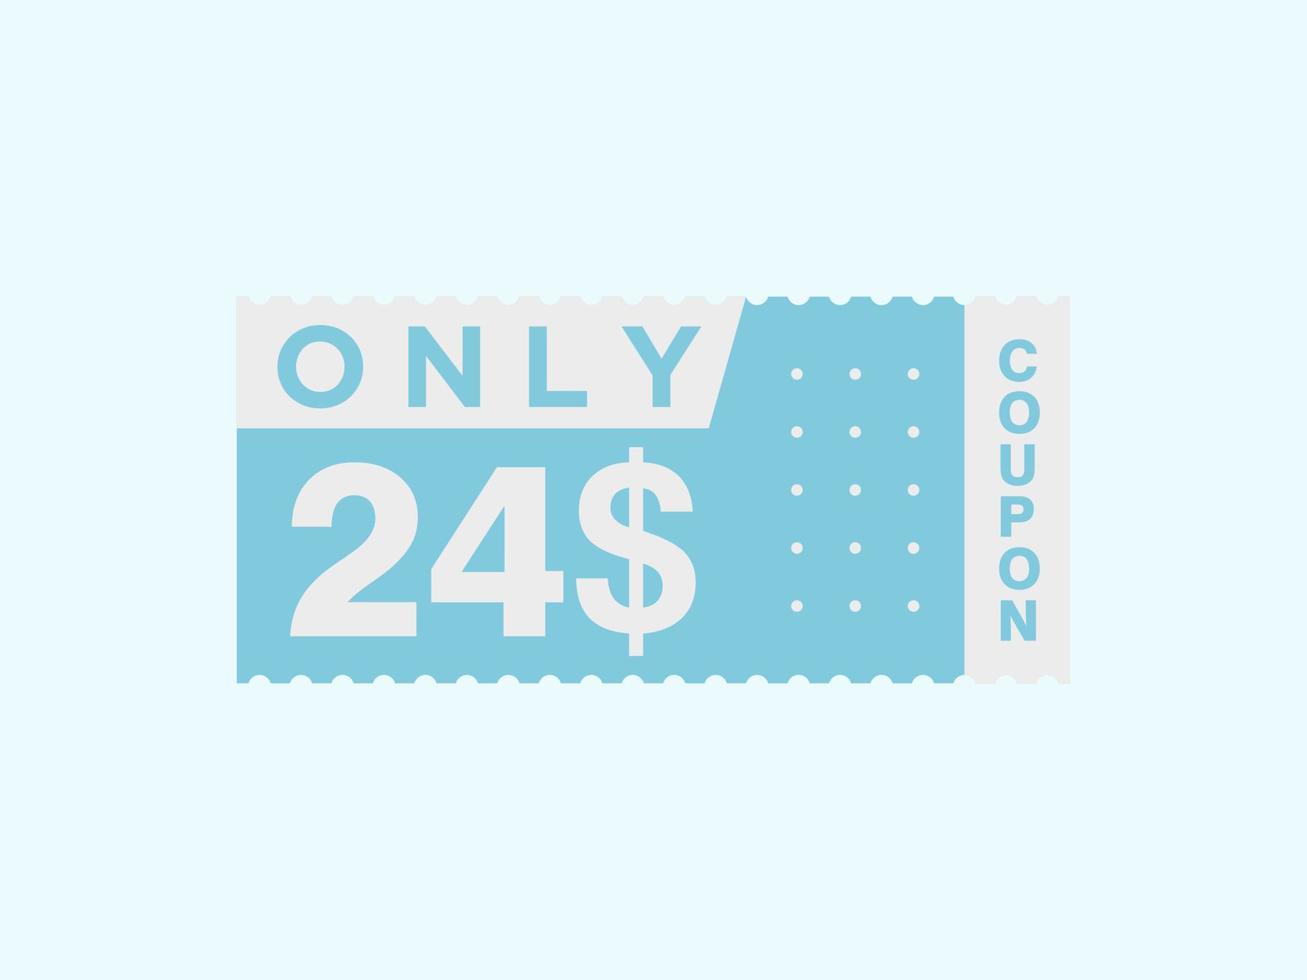 24 Dollar Only Coupon sign or Label or discount voucher Money Saving label, with coupon vector illustration summer offer ends weekend holiday